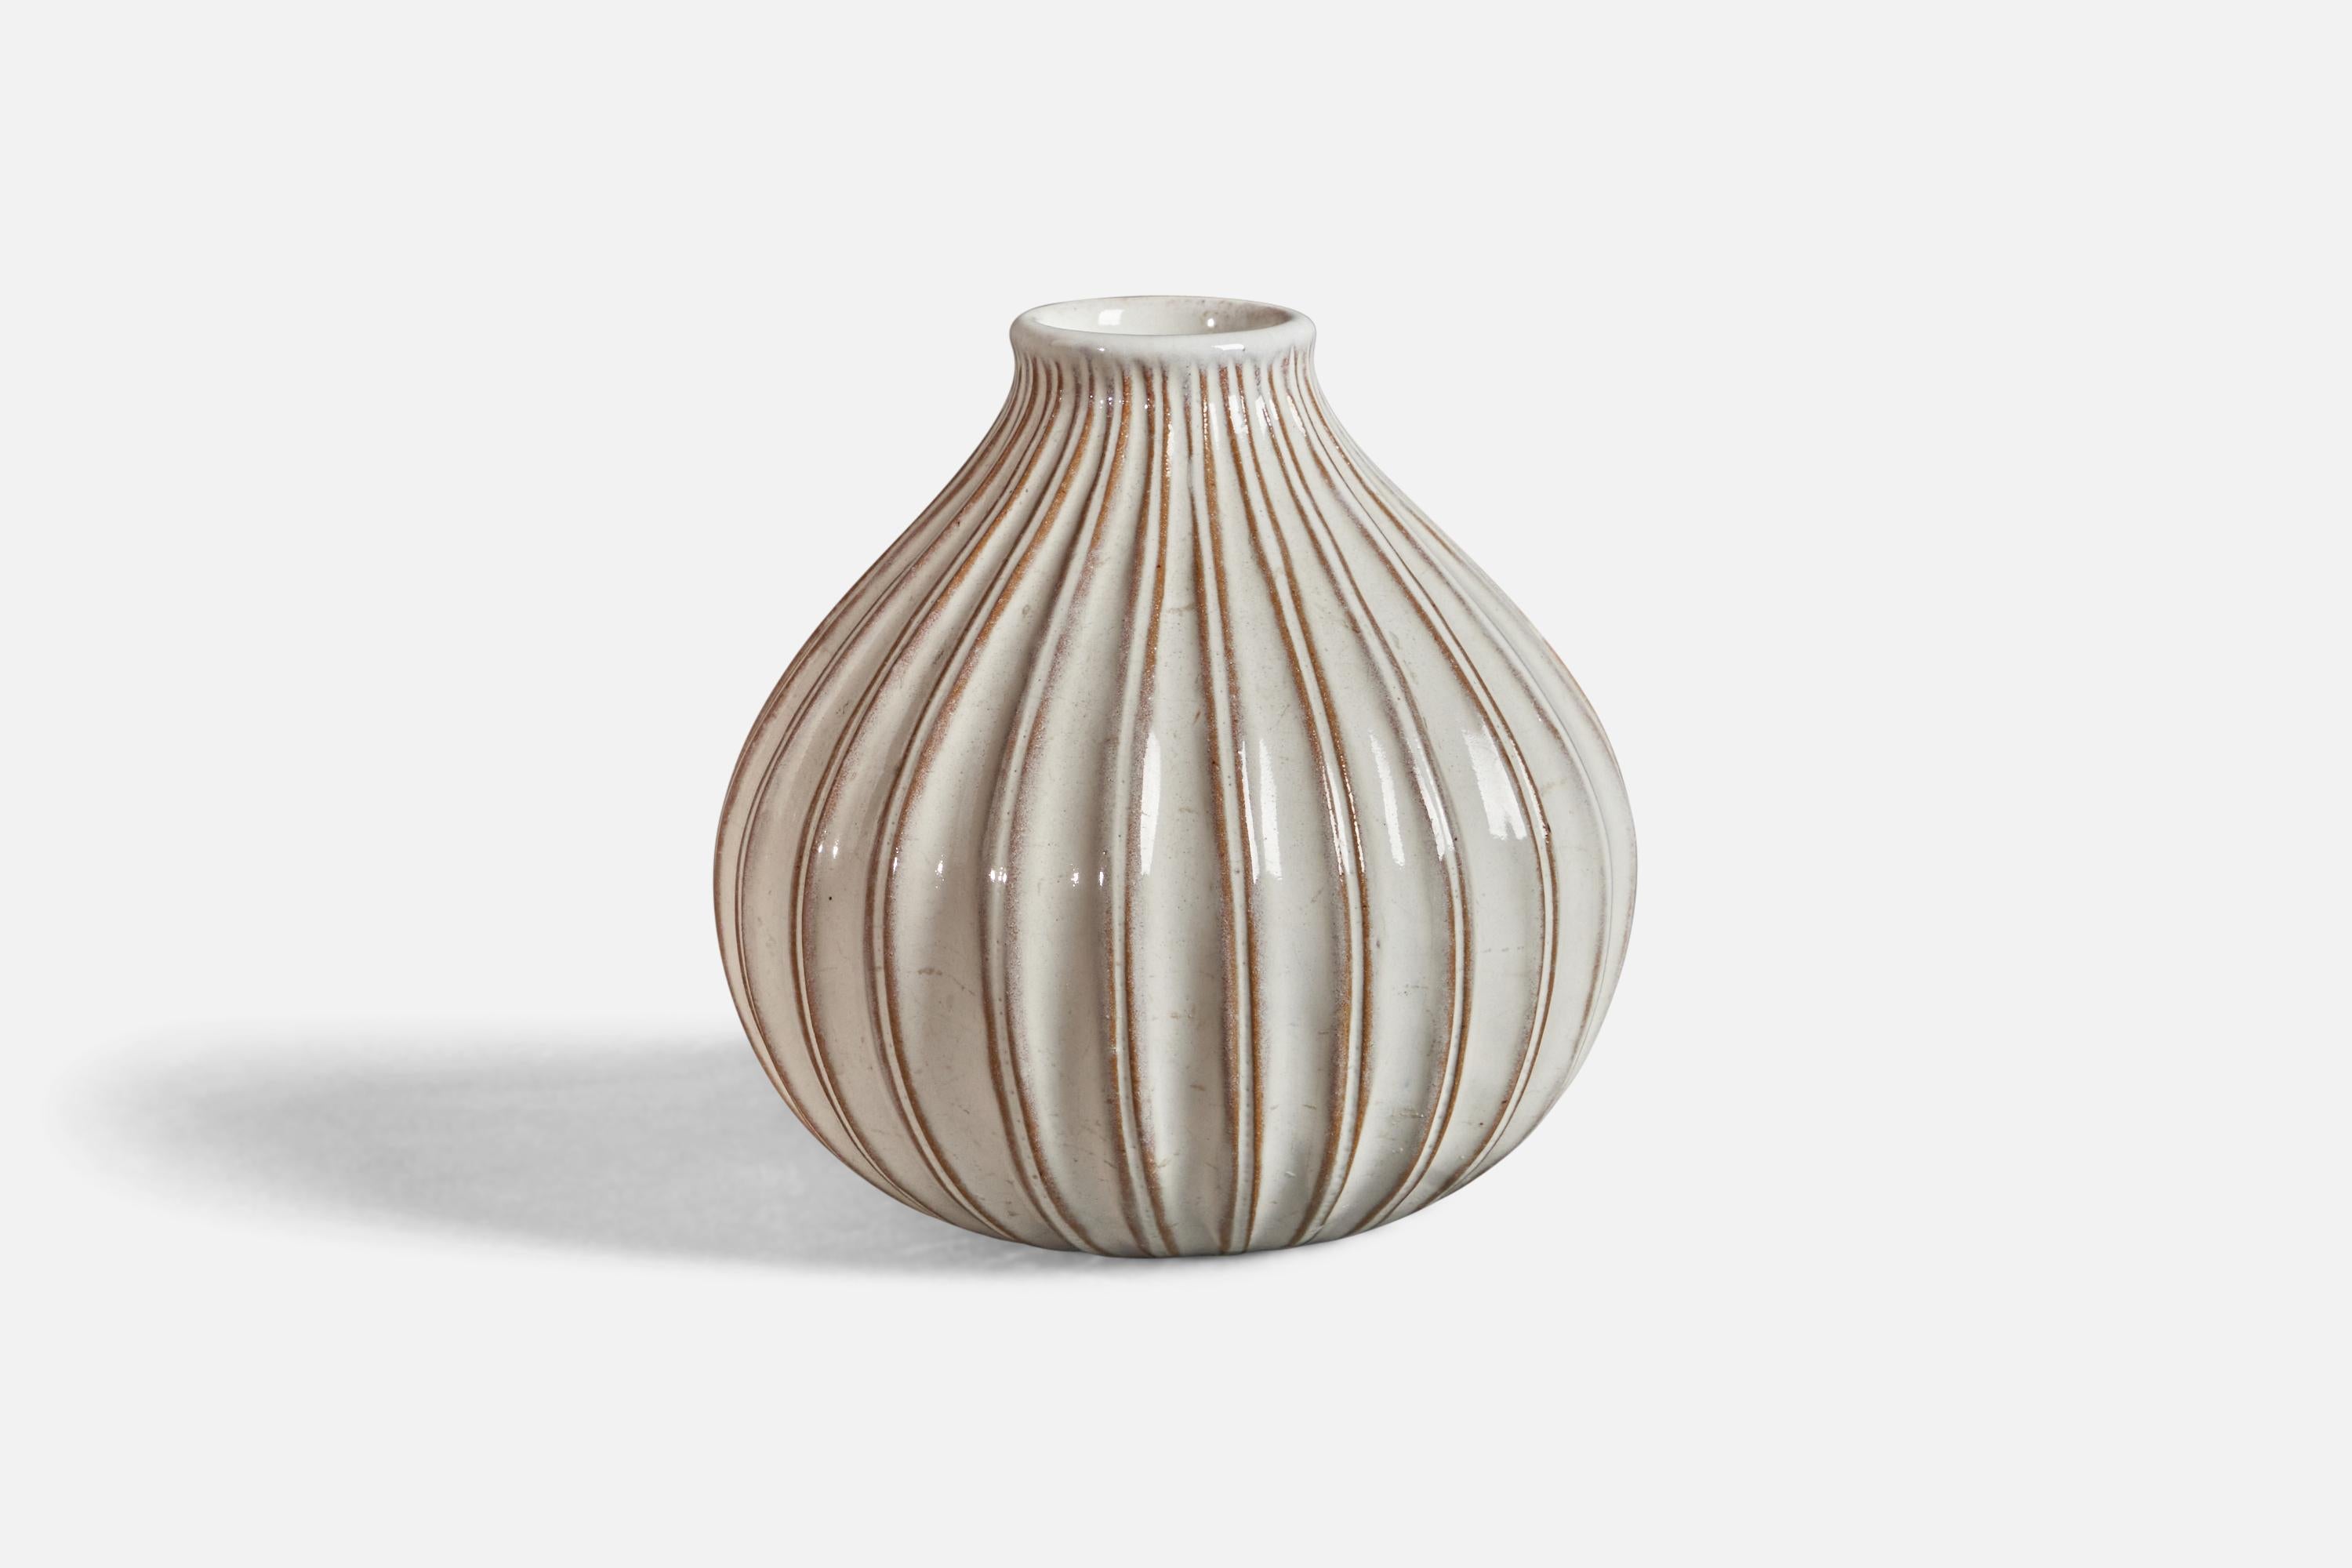 A white-glazed fluted earthenware vase, designed and produced in Denmark, c. 1940s.